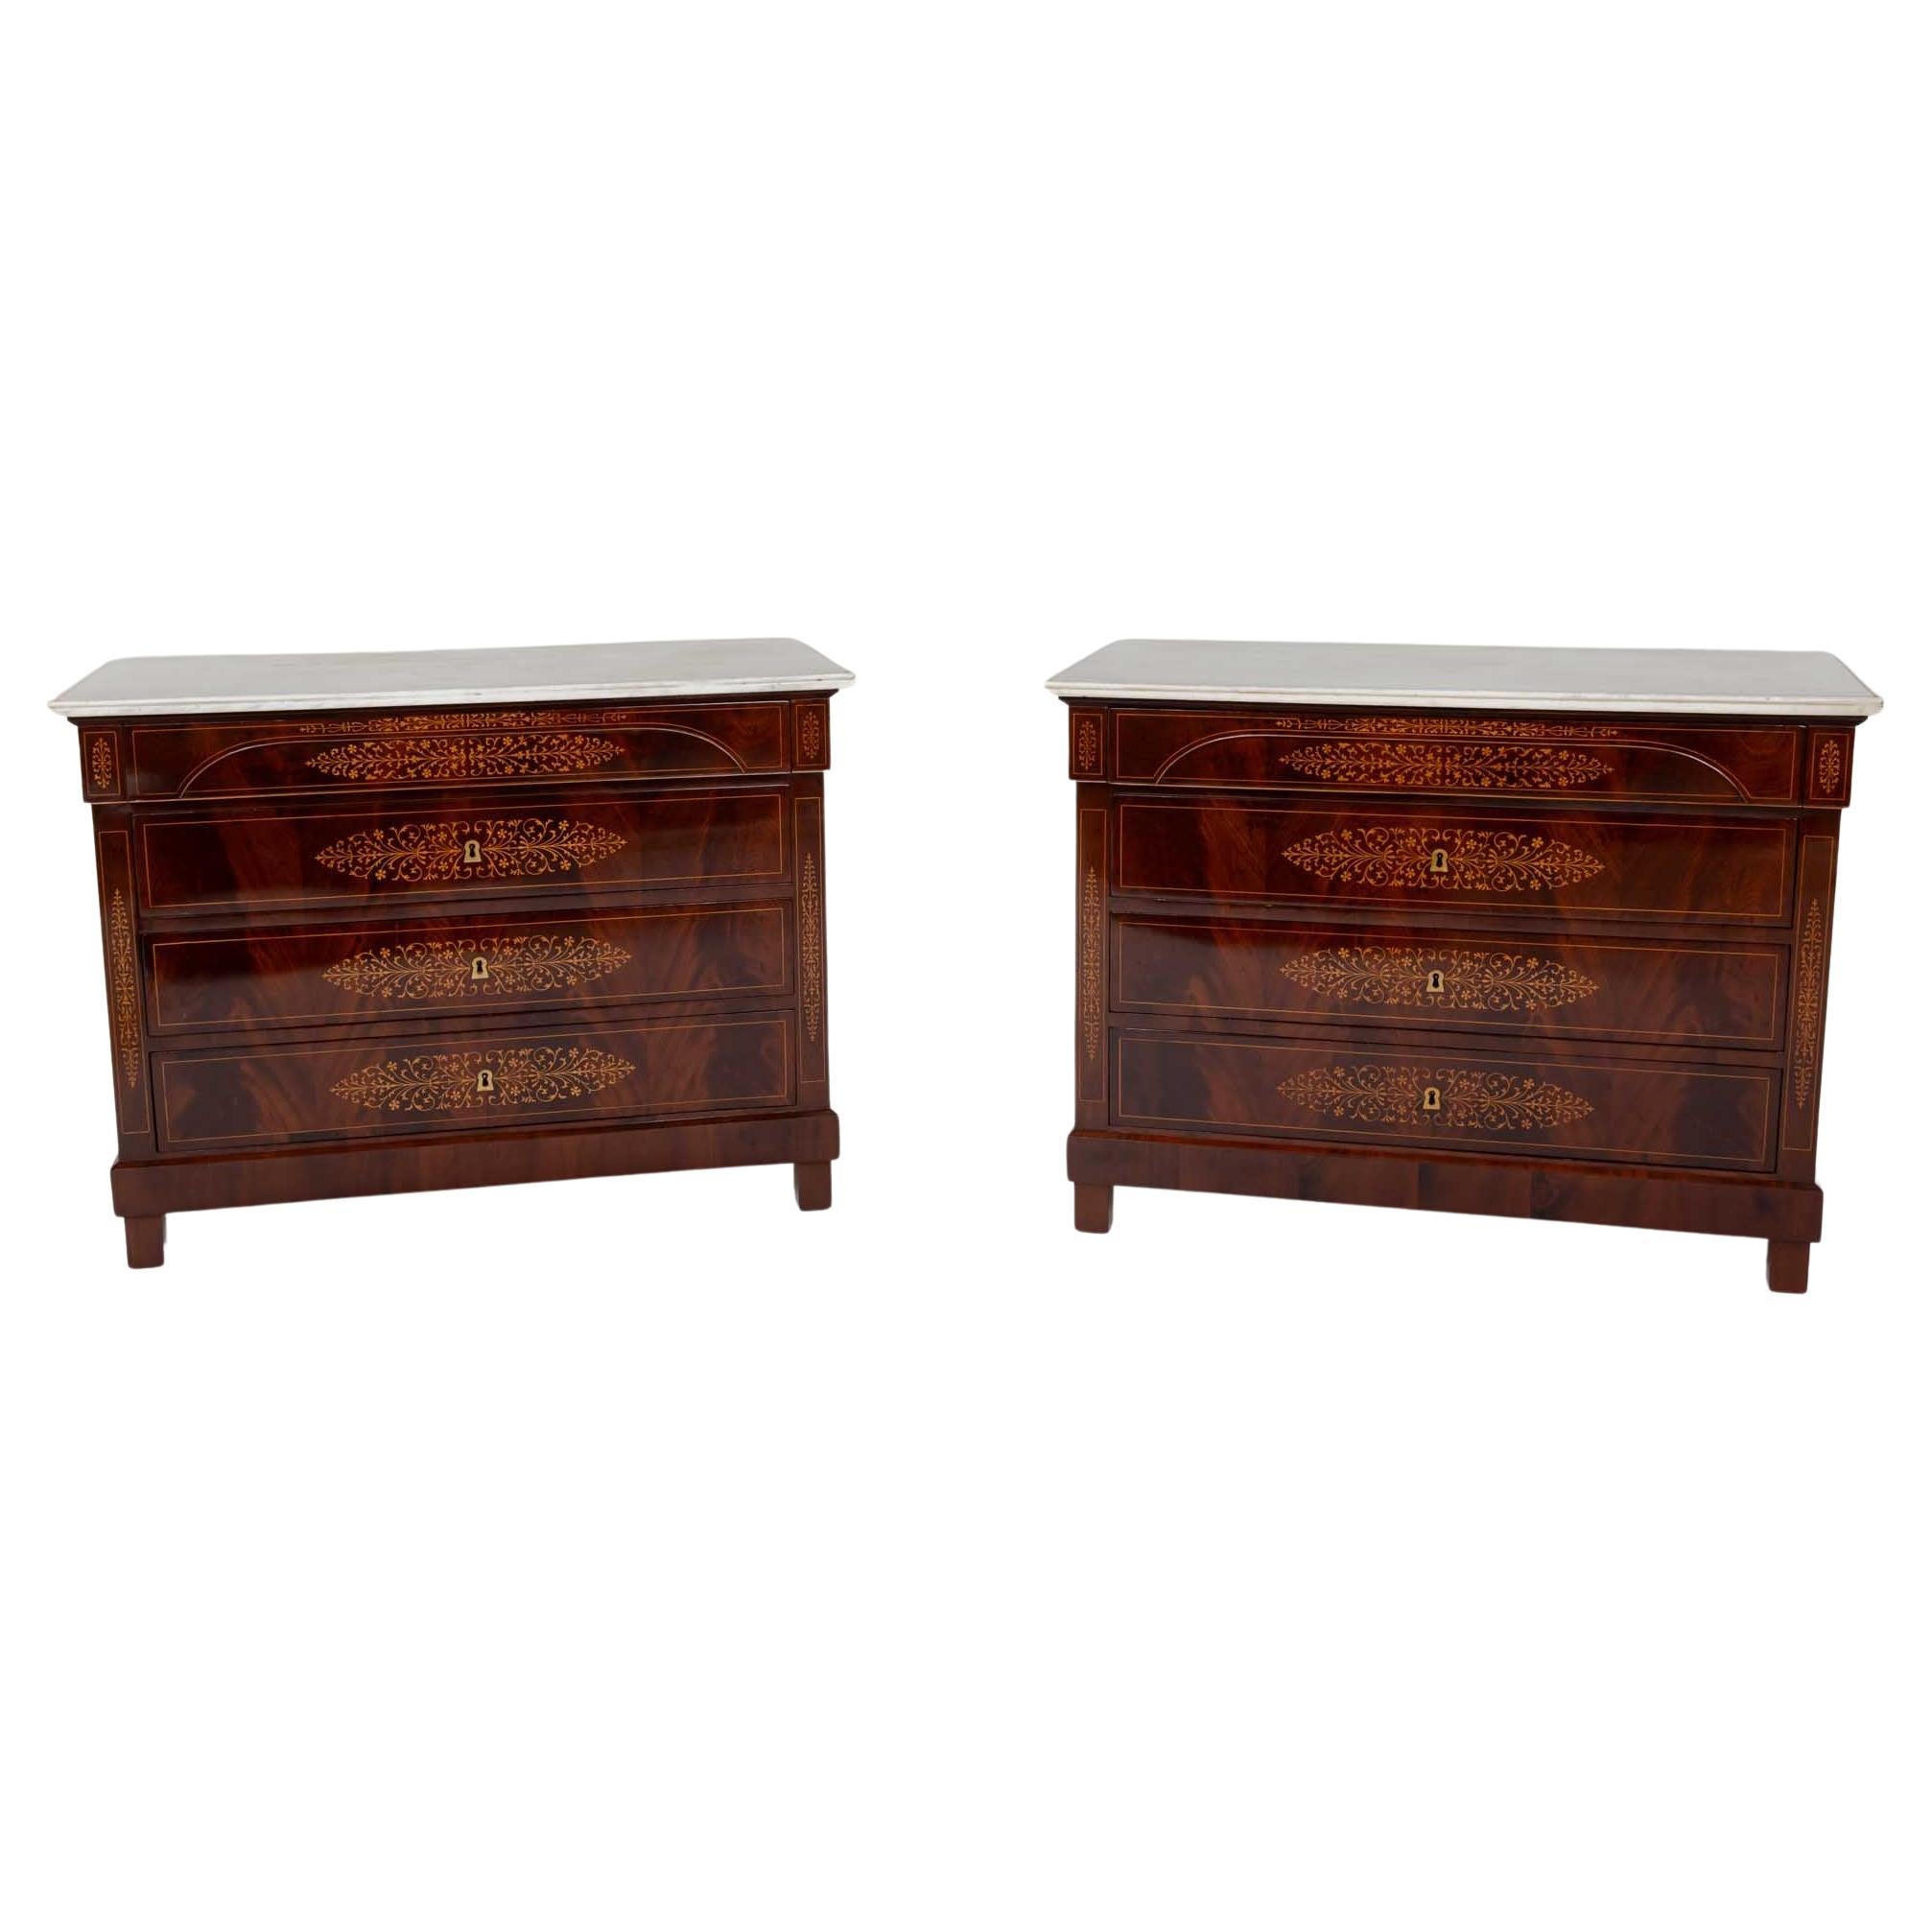 Pair of Charles X Chests of Drawers with Marble Tops, circa 1830 For Sale